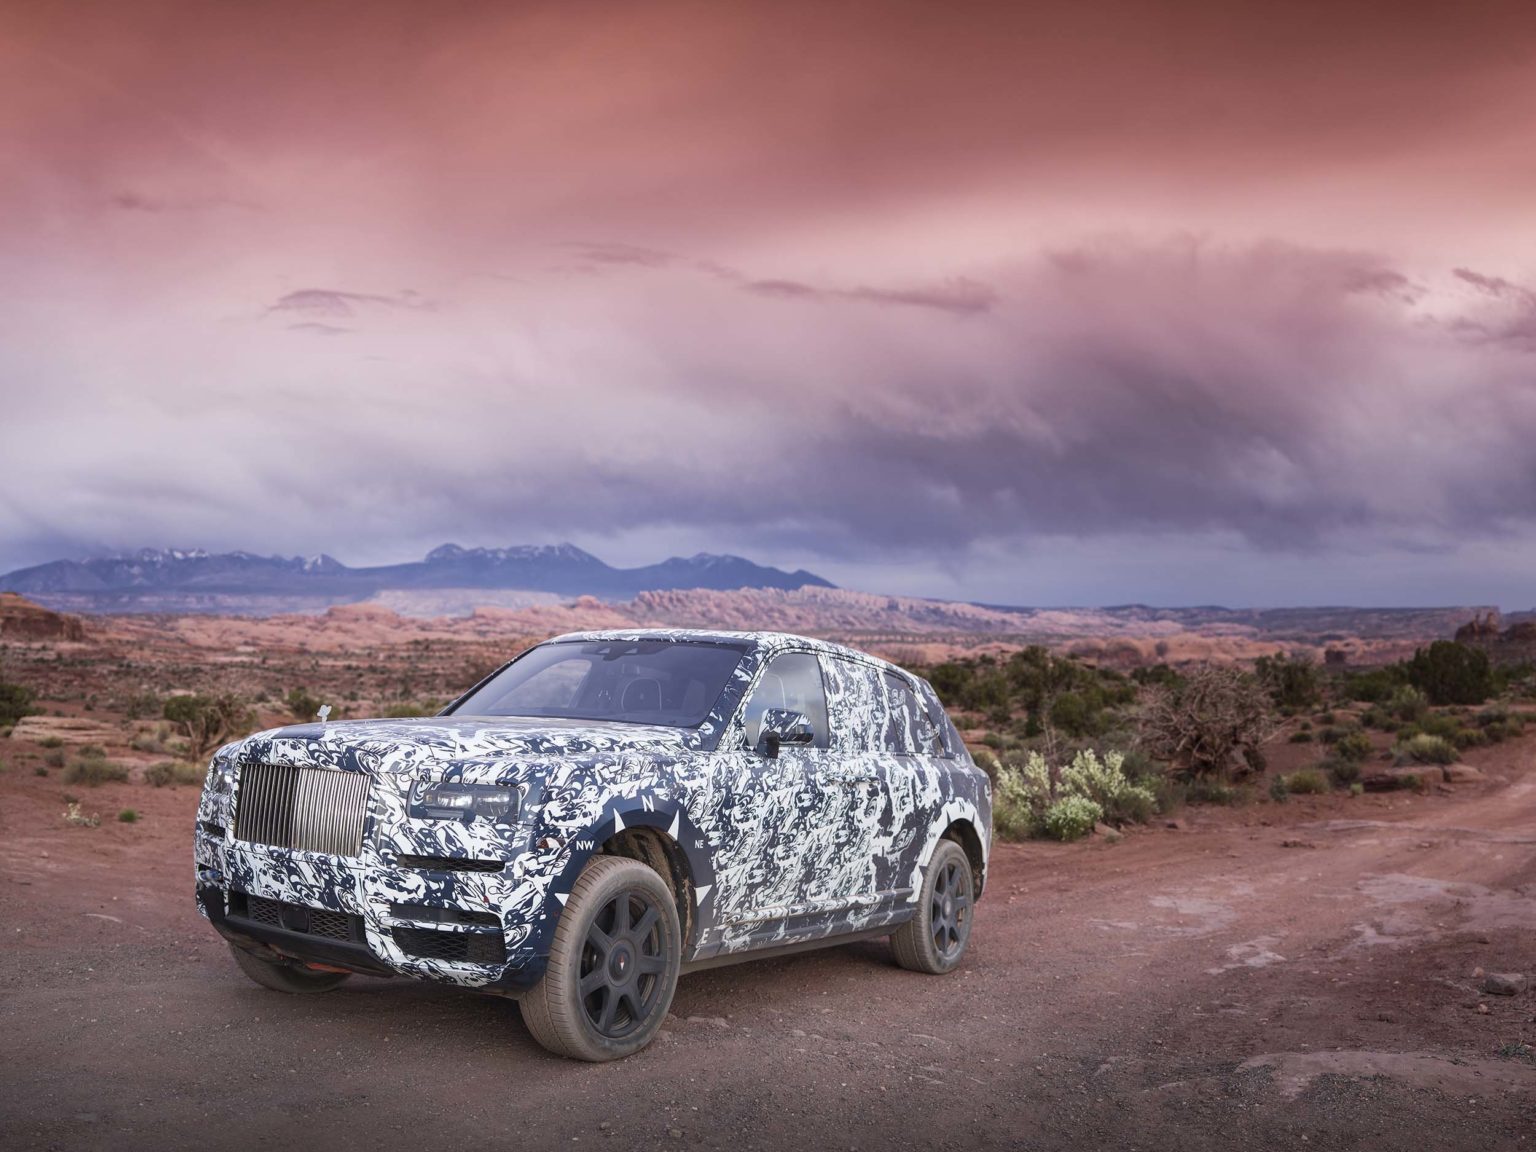 The Rolls-Royce Cullinan, seen here in disguise during testing, is just one of the models featured in the series.